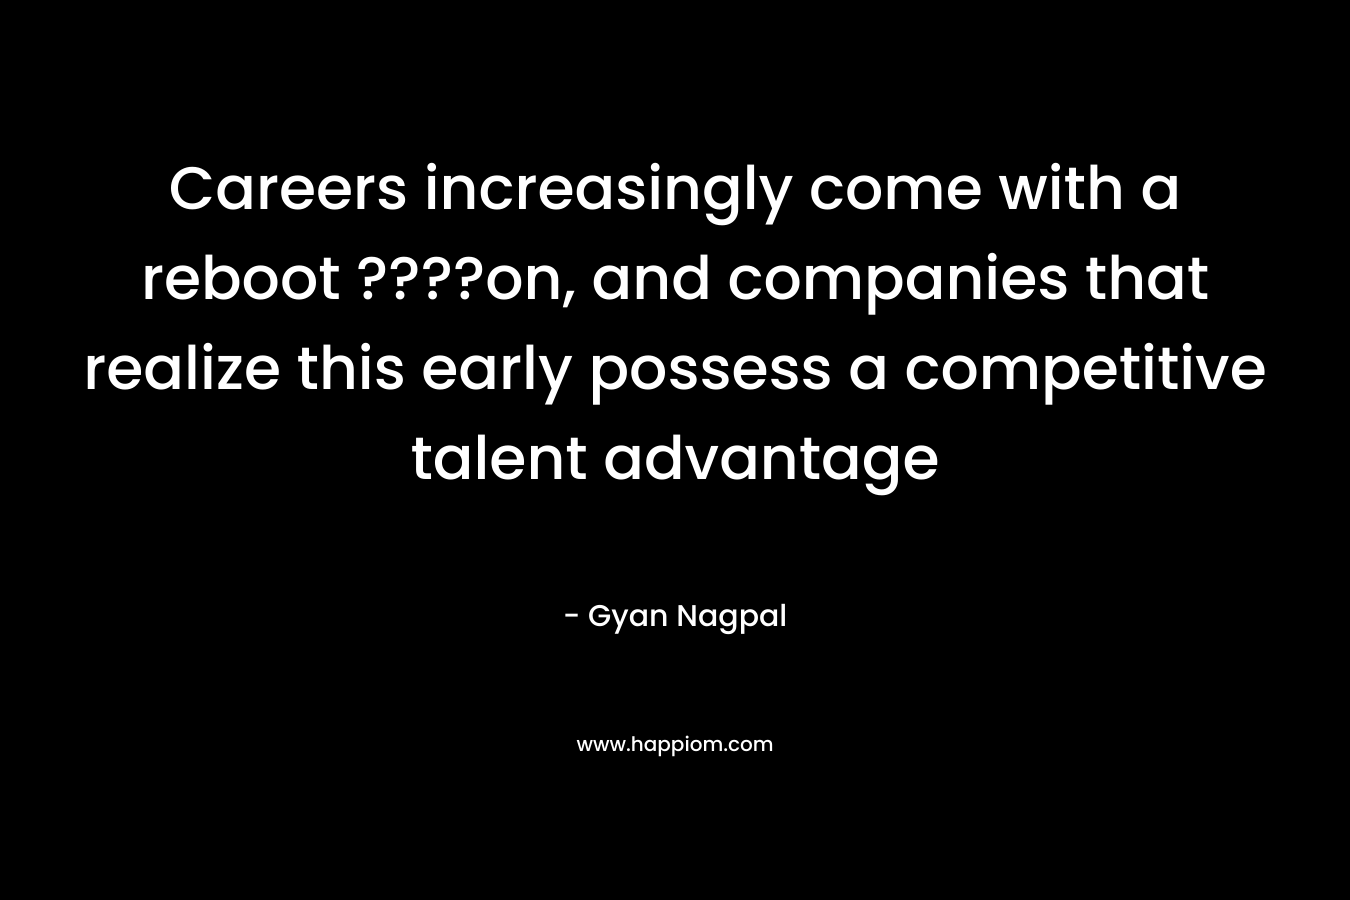 Careers increasingly come with a reboot ????on, and companies that realize this early possess a competitive talent advantage – Gyan Nagpal